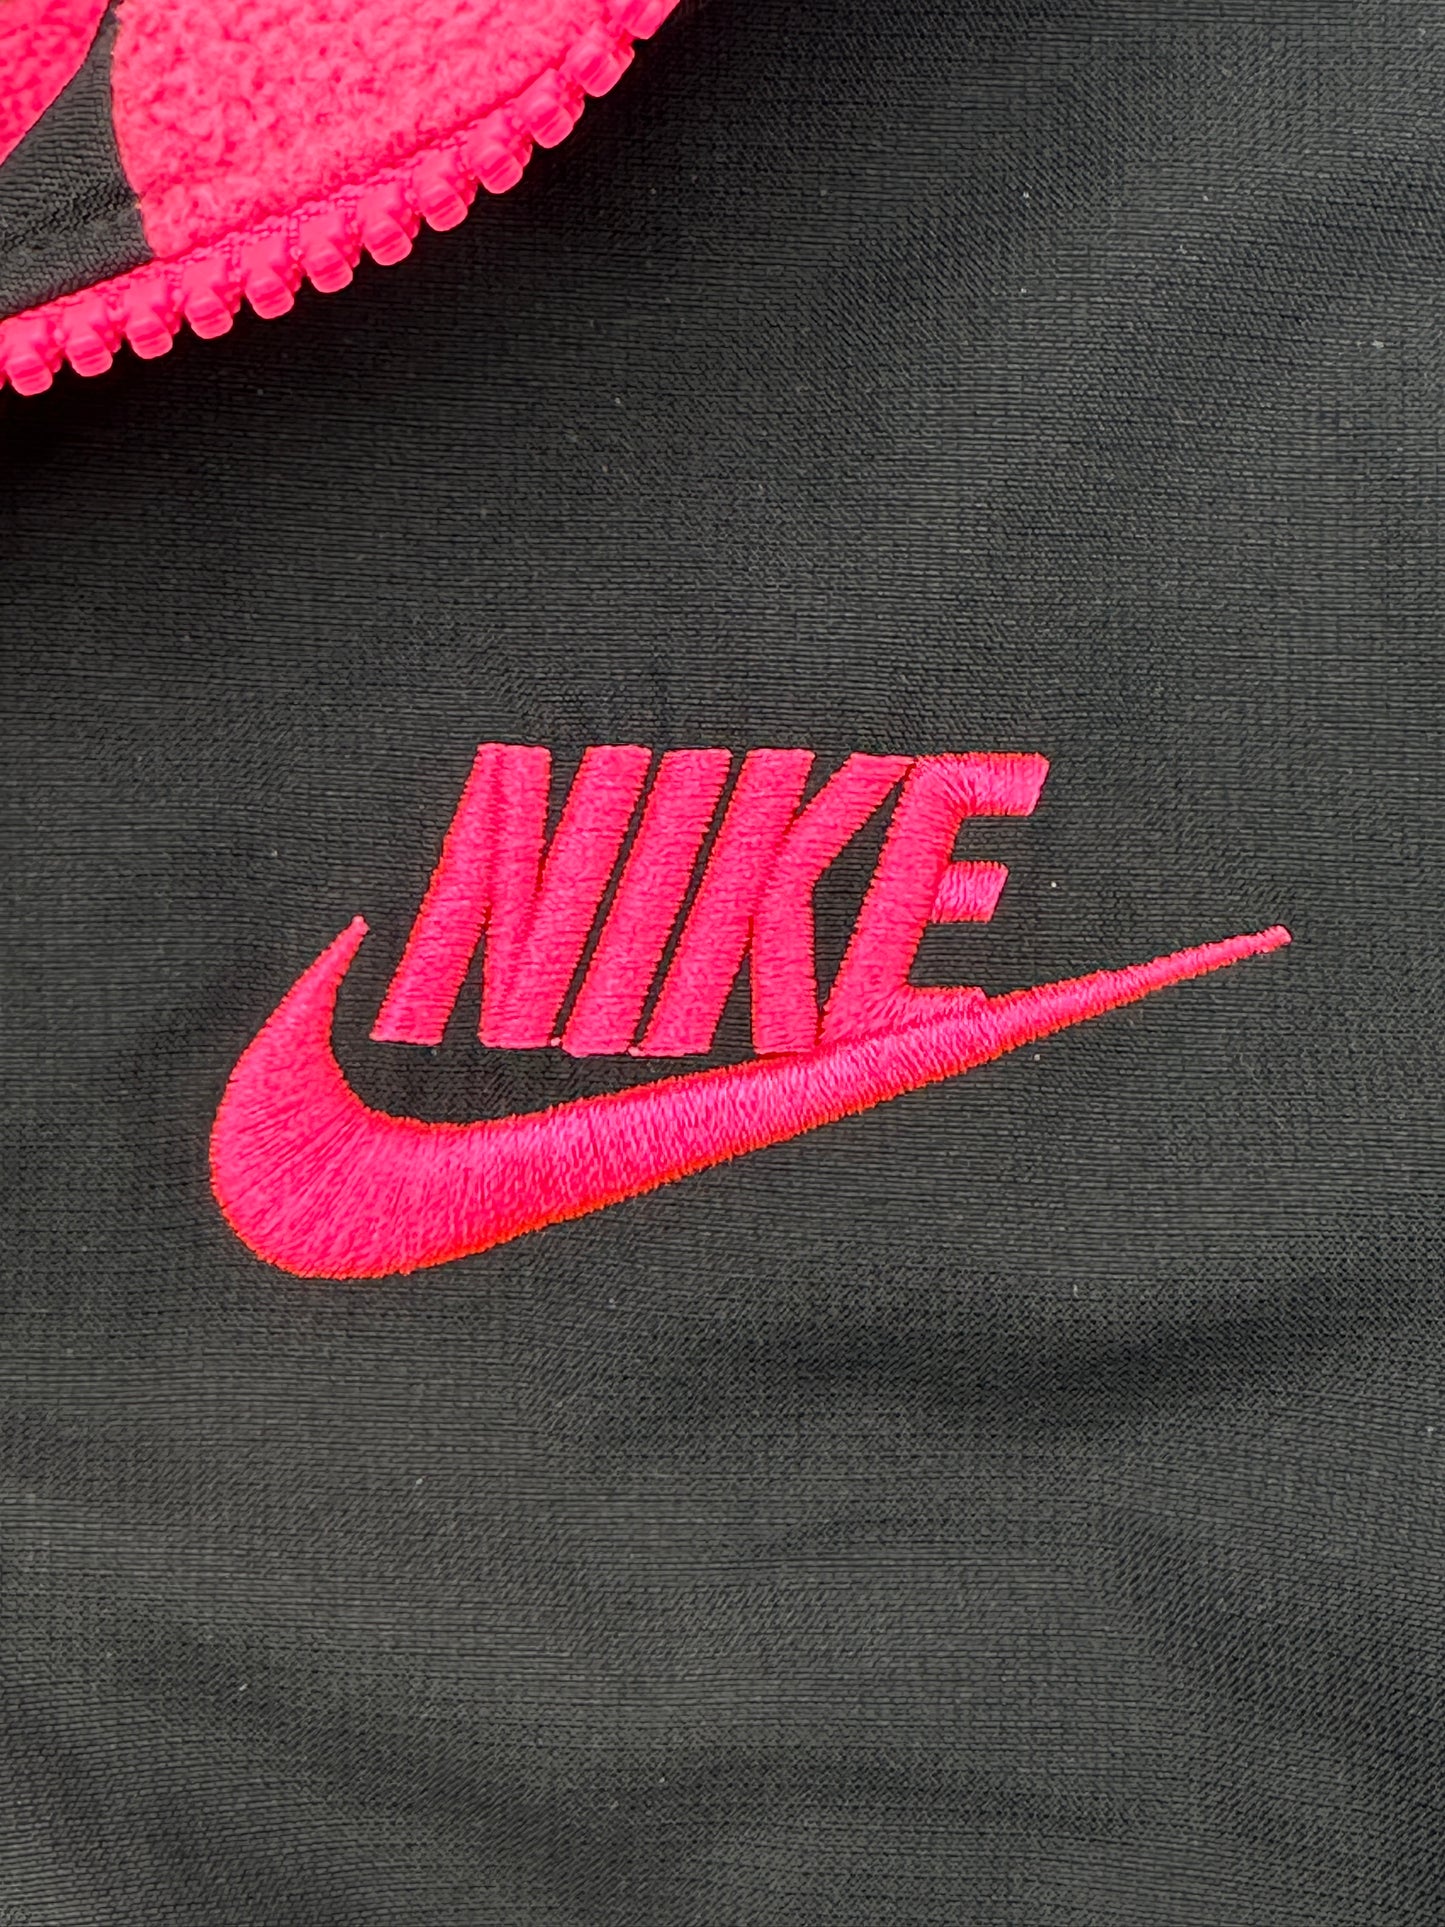 Nike Girls' Size 6 Black Soft Shell Hooded Jacket with Pink Fleece Lining